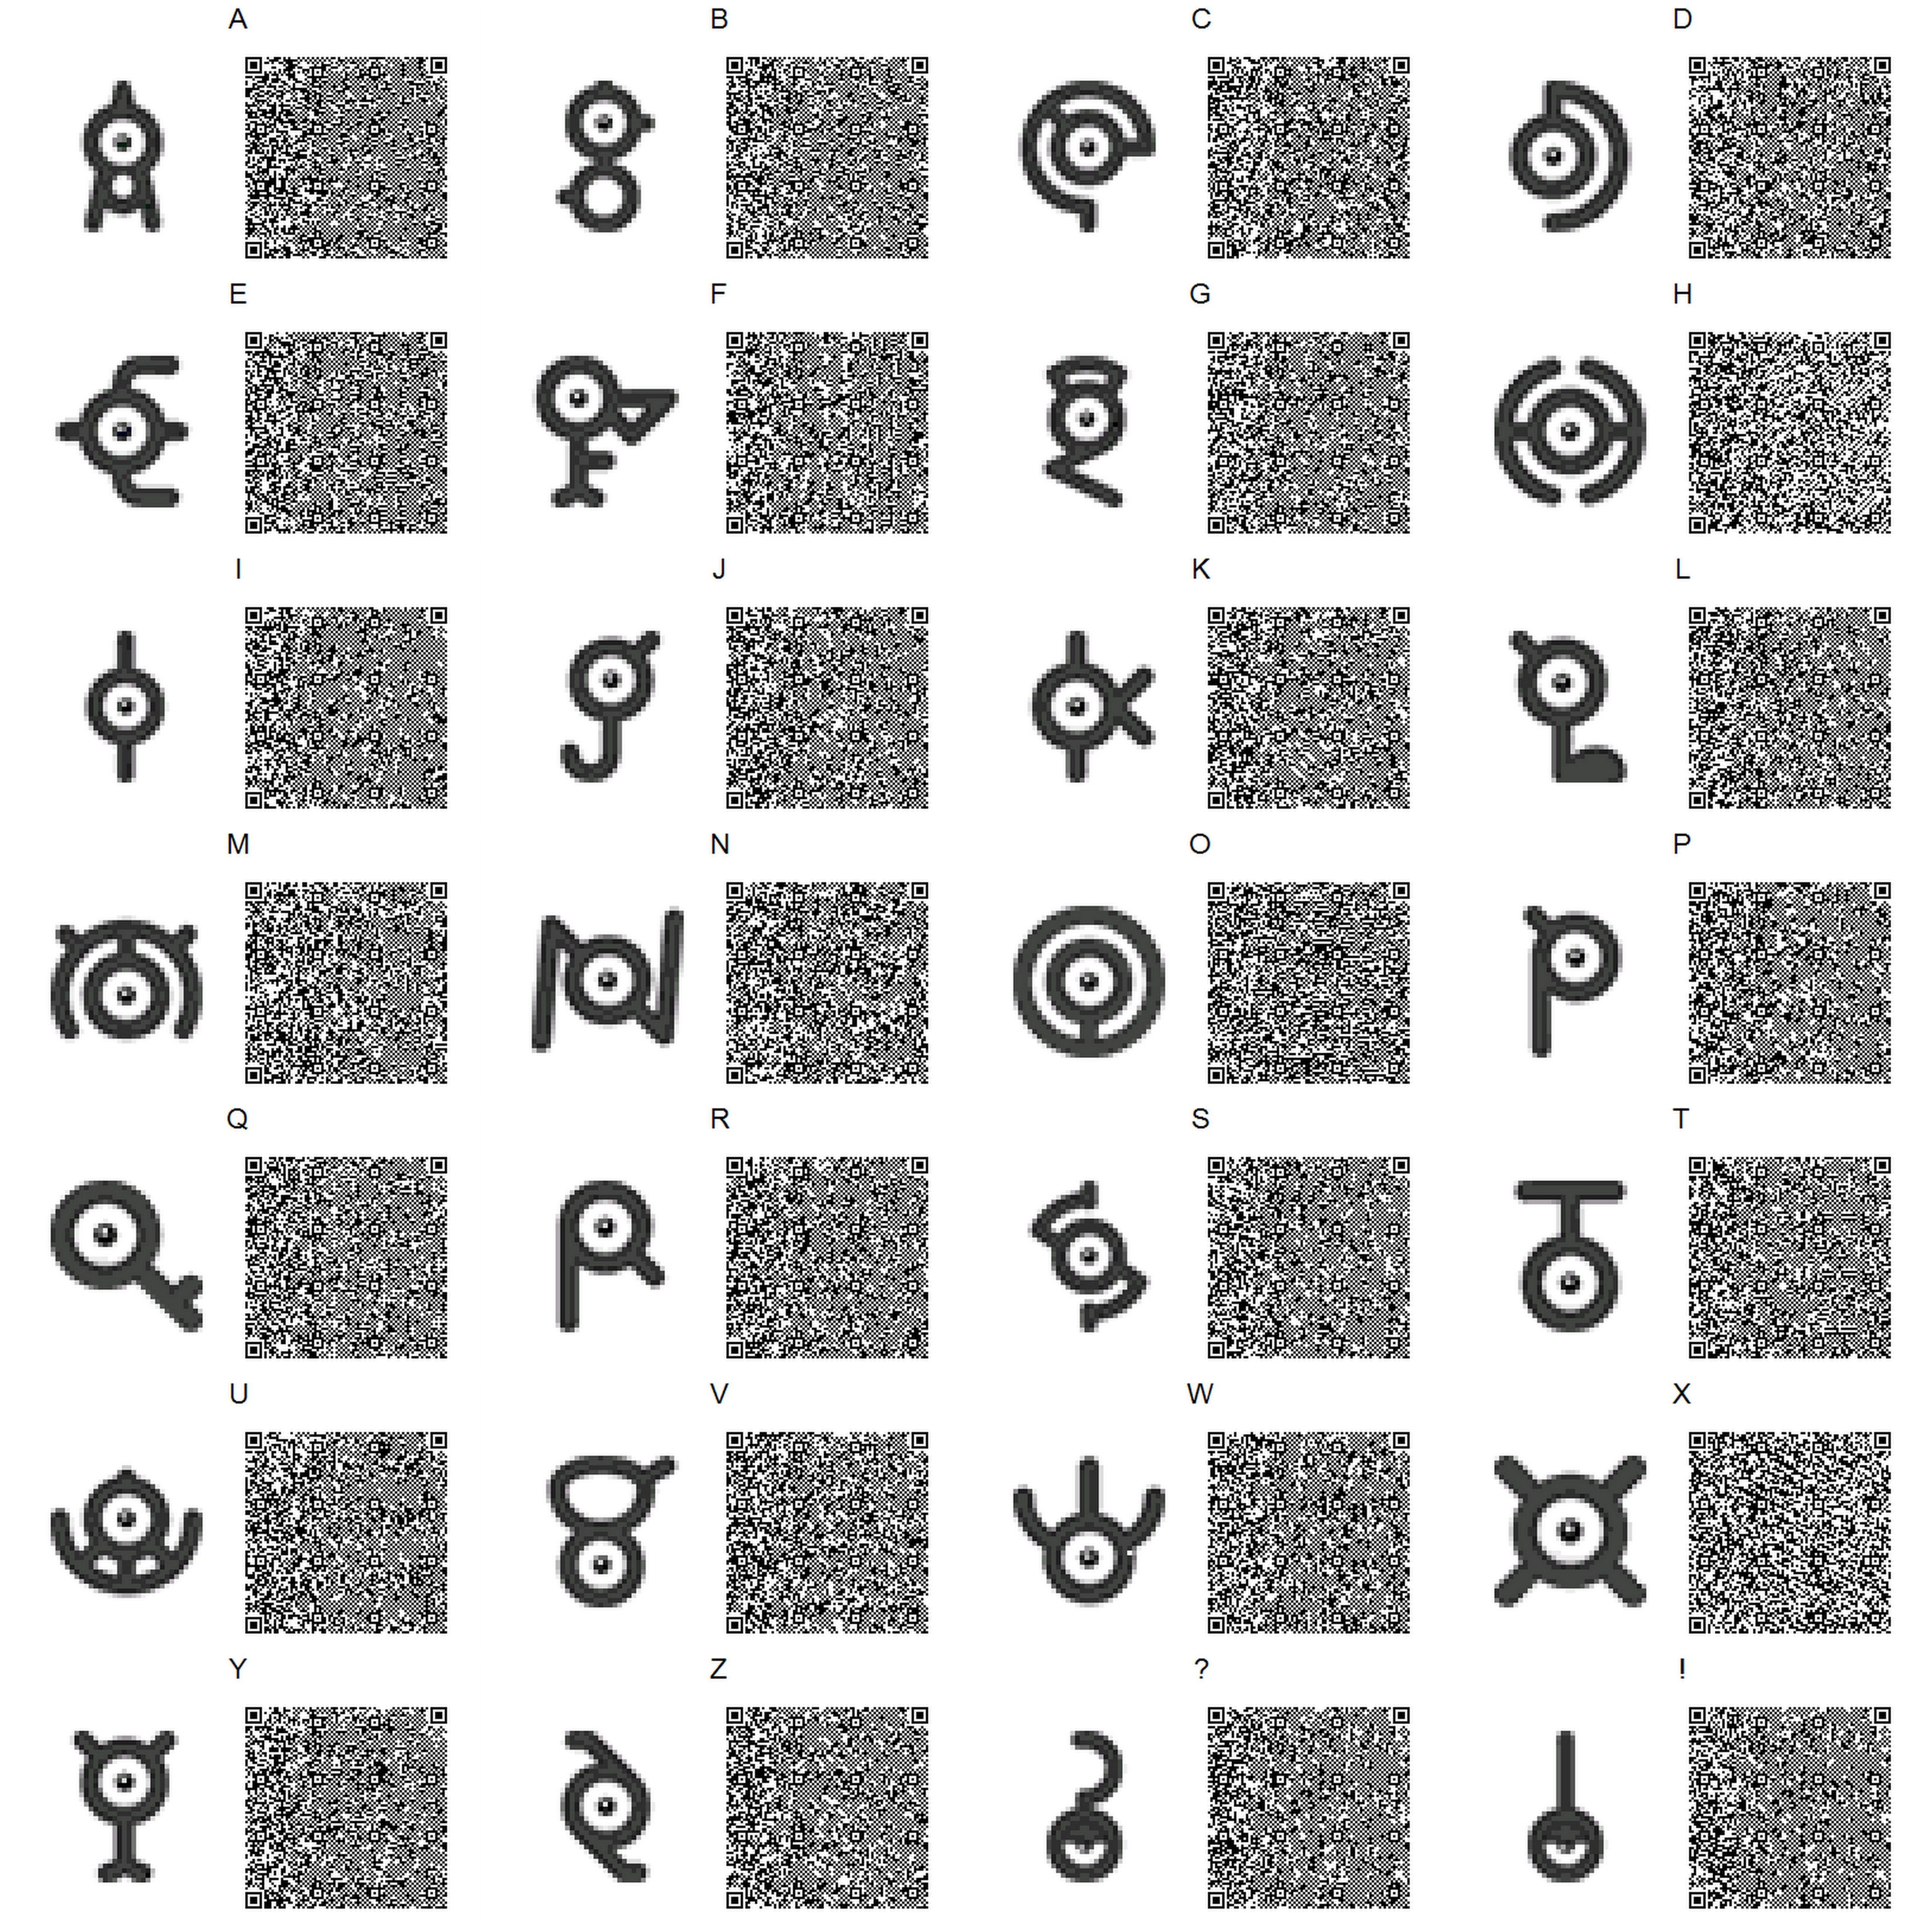 Pokemon Unown Forms Pattern for ACNL